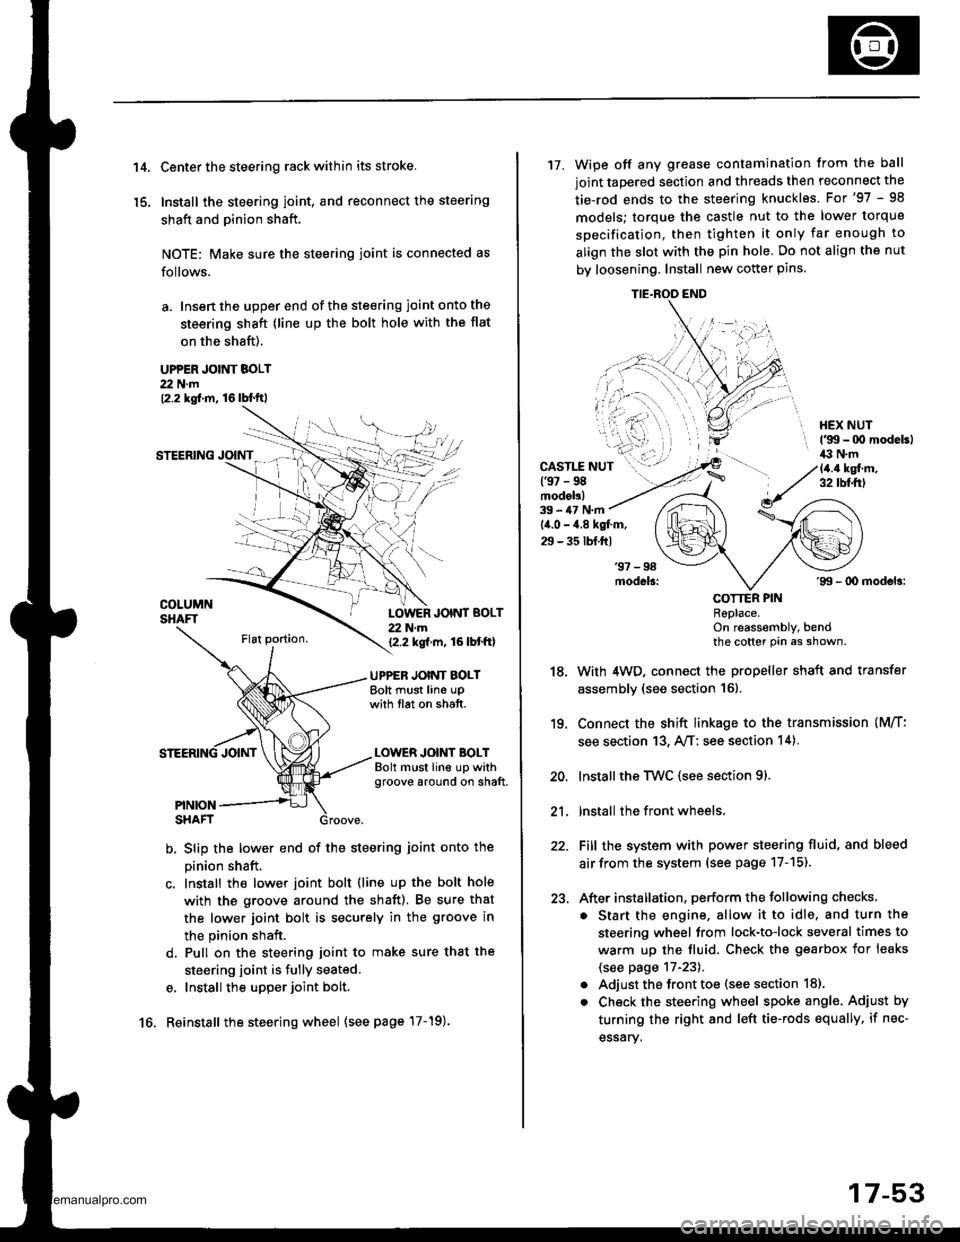 HONDA CR-V 1998 RD1-RD3 / 1.G Manual PDF 
t 4.
15.
Center the steering rack within its stroke.
Install the steering joint, and reconnect the steering
shaft and pinion shaft.
NOTE: Make sure the steering joint is connected as
follows.
a. Ins